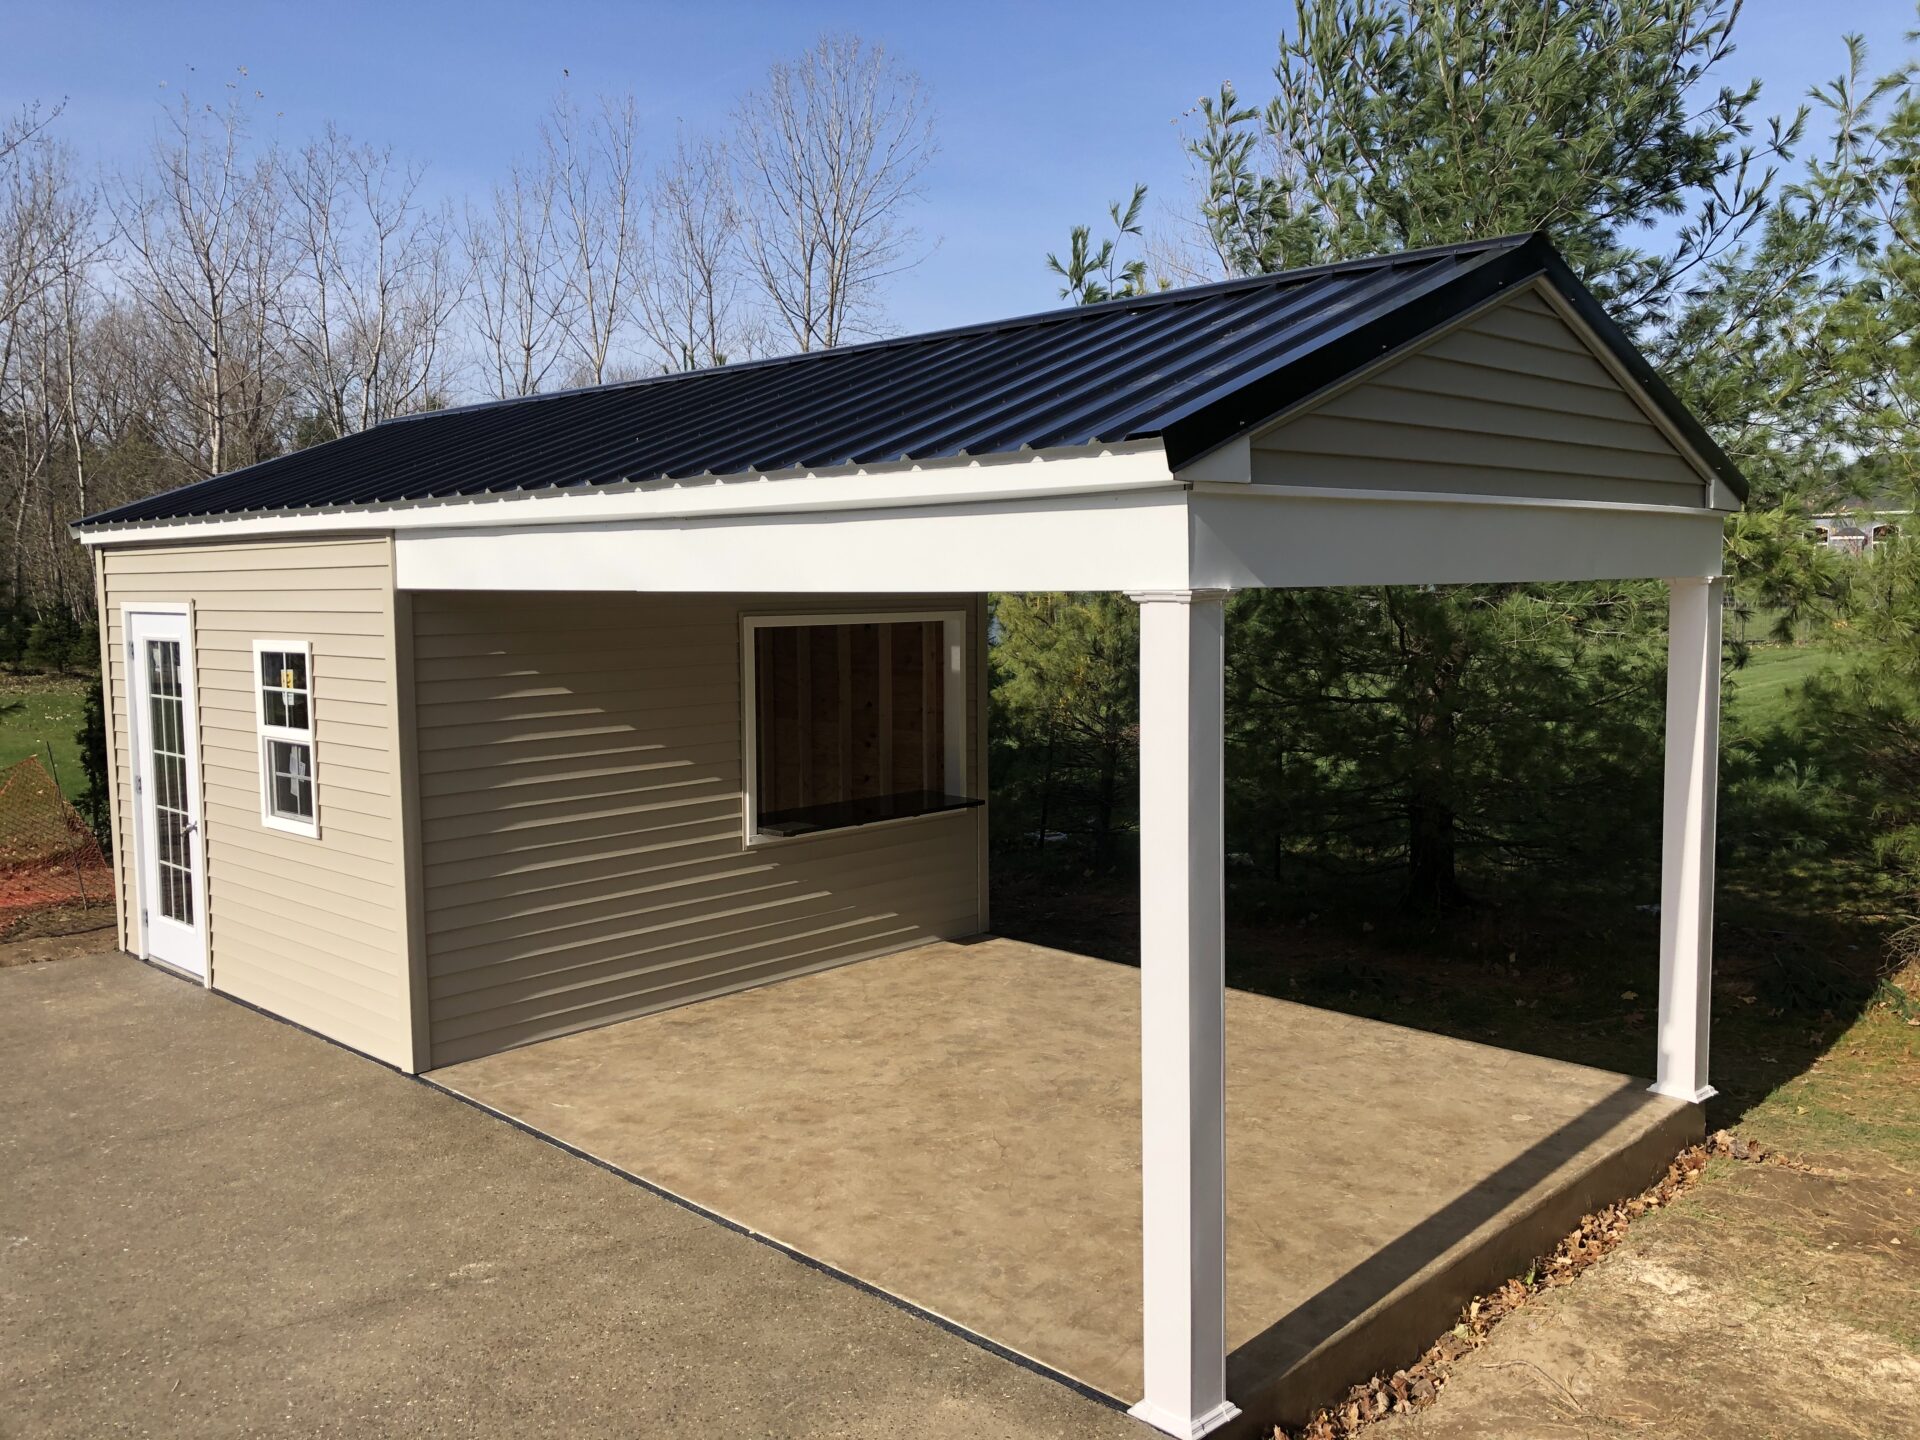 A carport with a black roof and white walls.